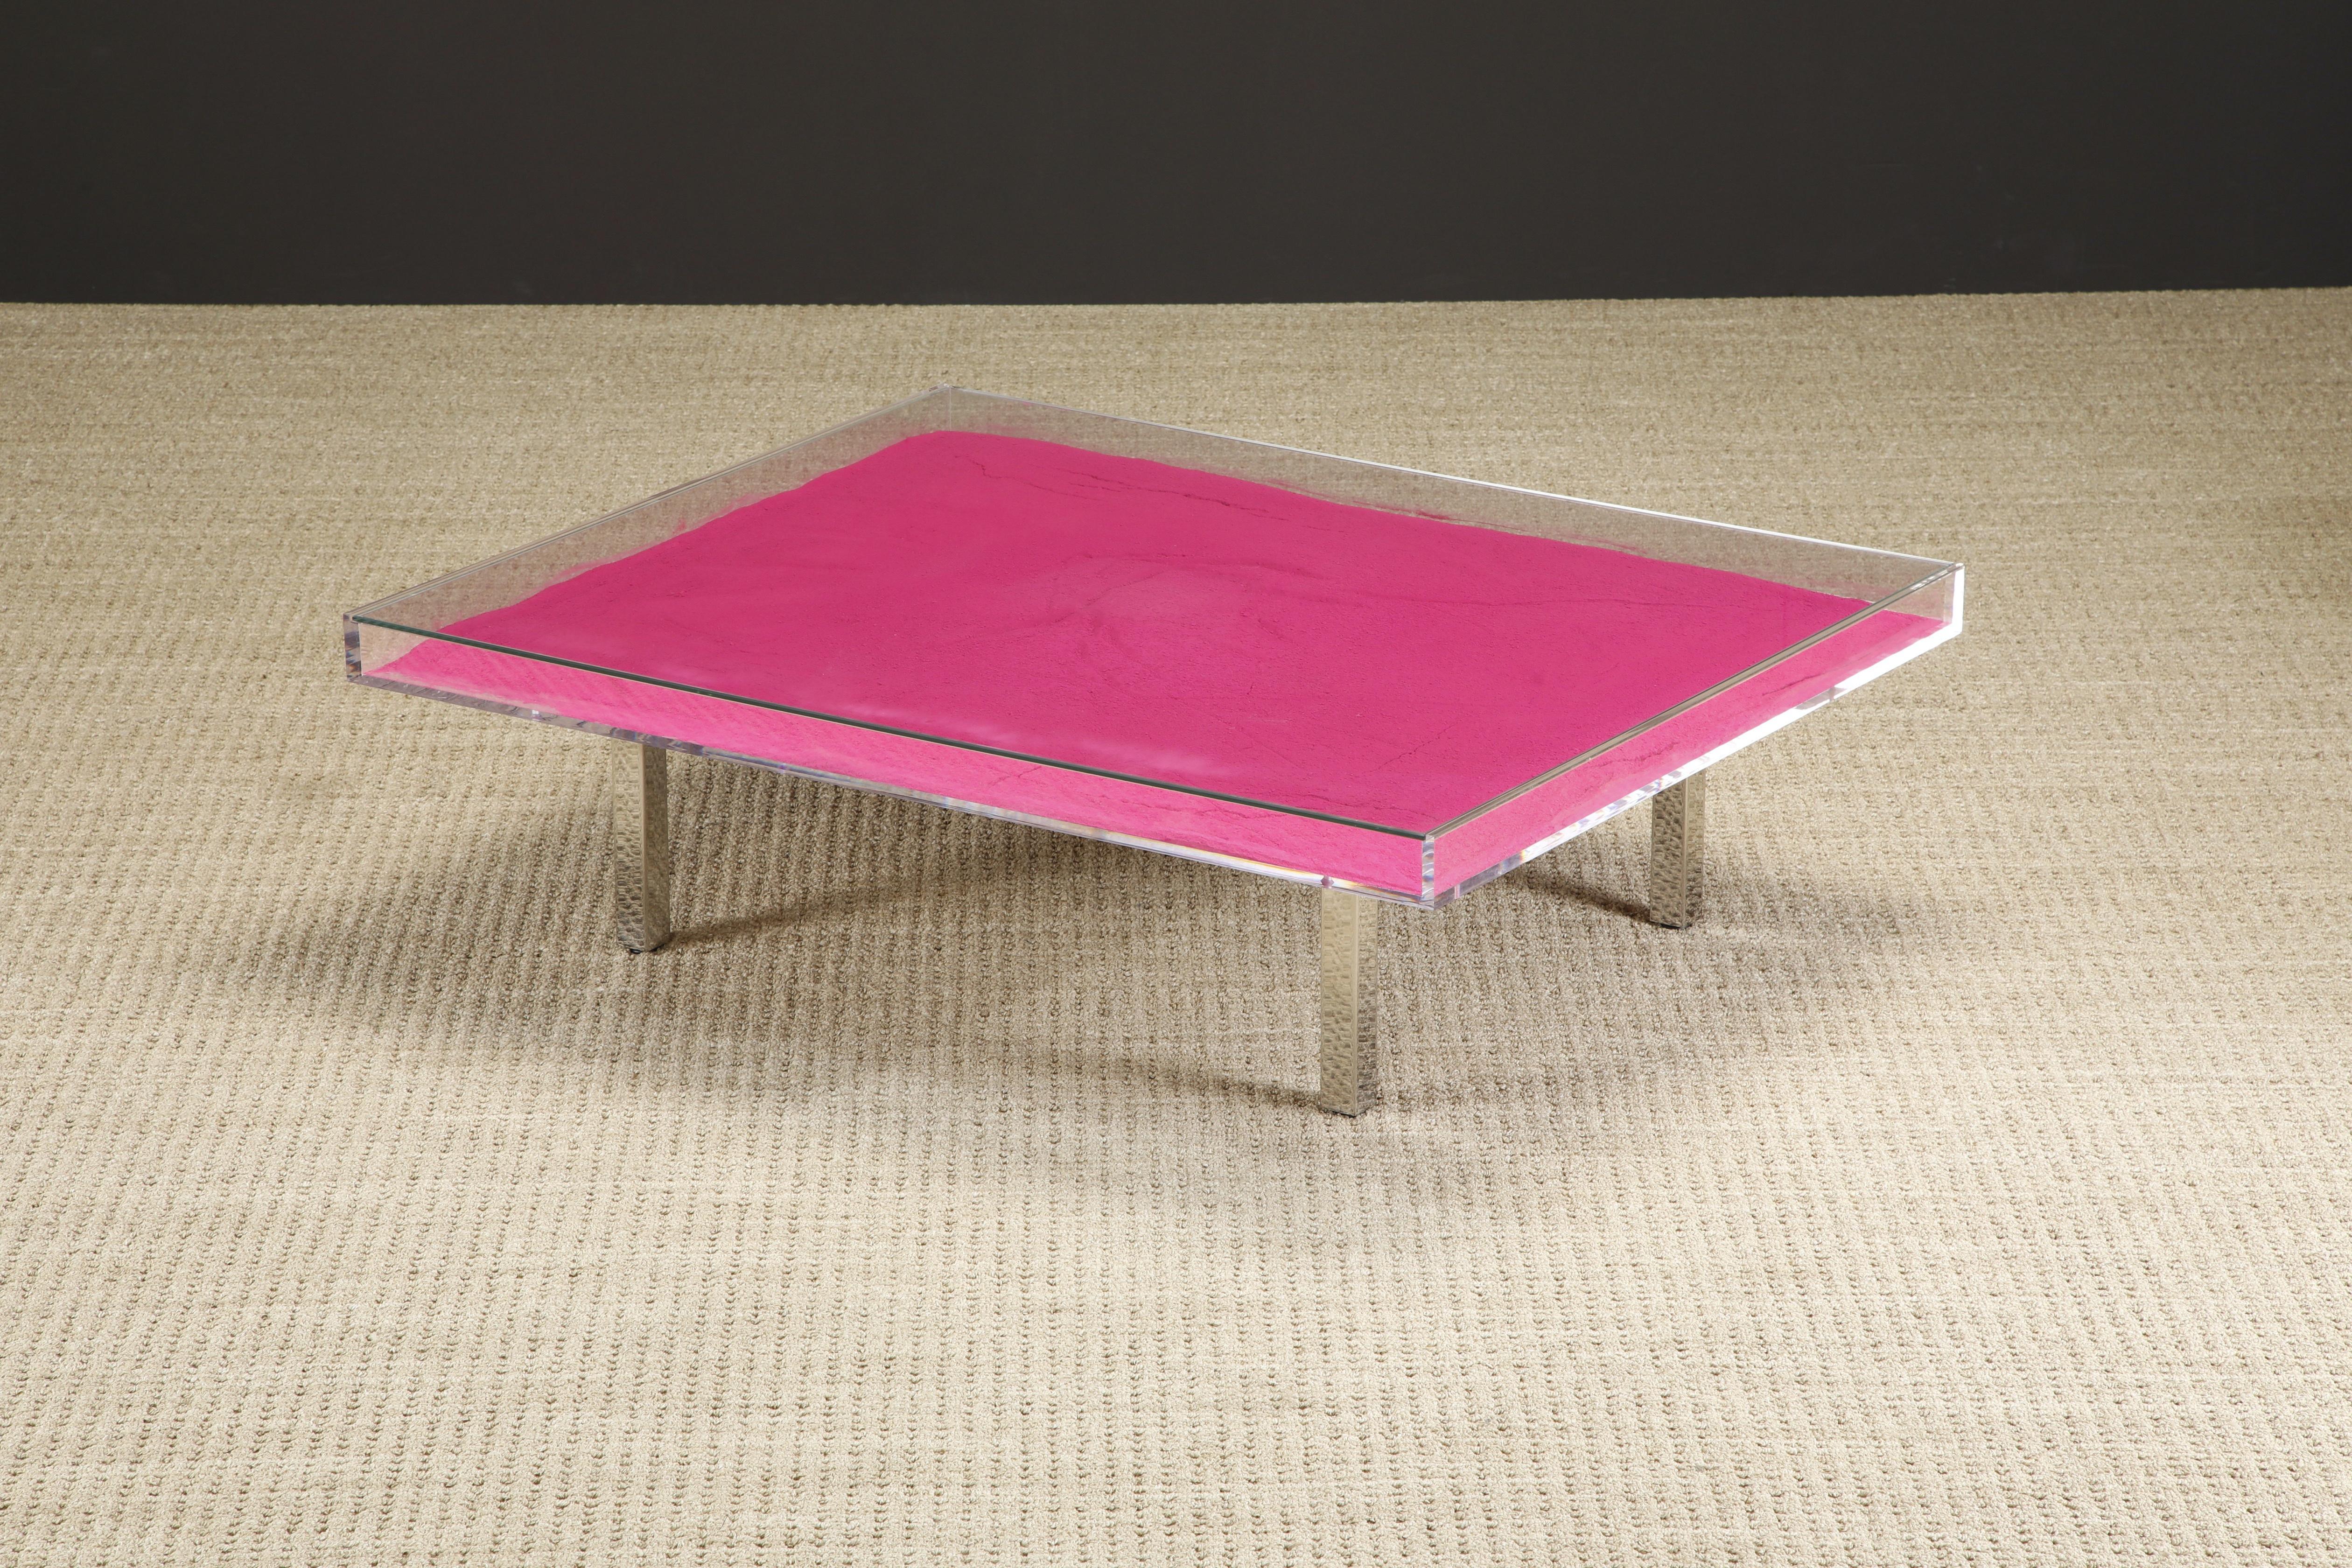 Glass Yves Klein 'Monopink' Rose Pigment Cocktail Table, 1961 / 1963 France, Signed 